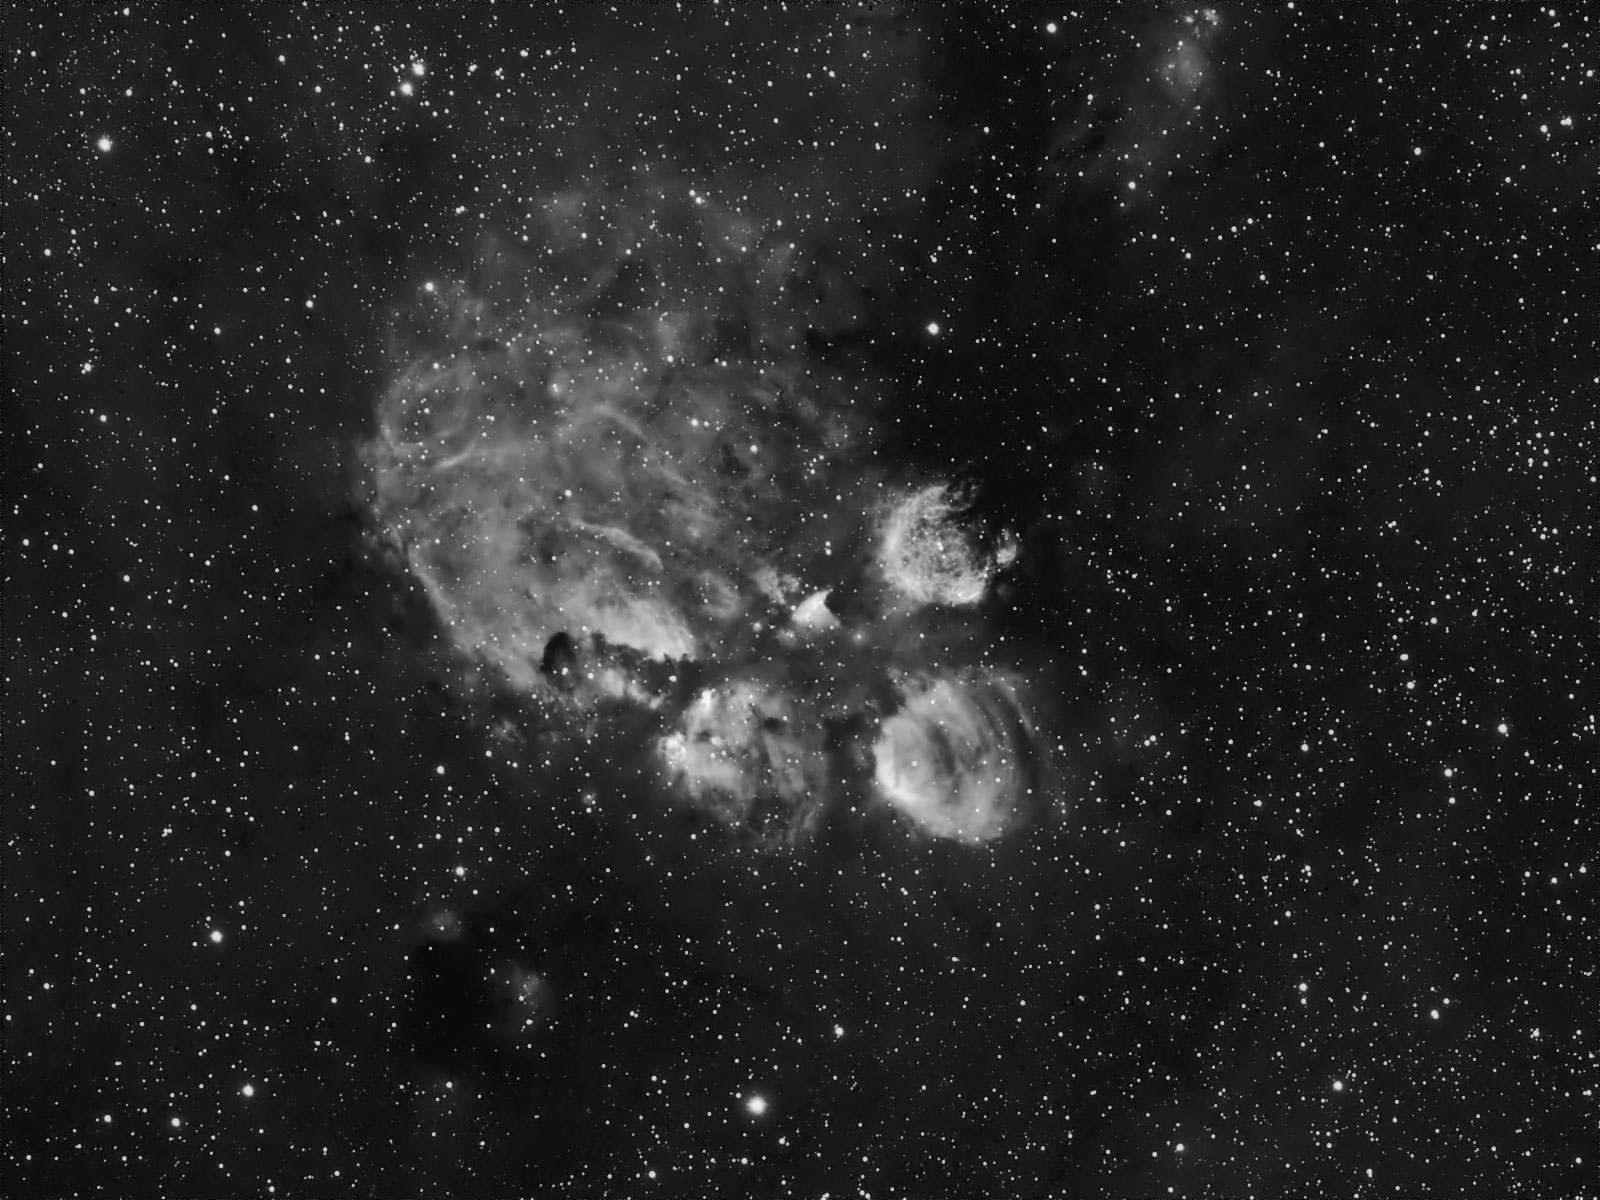 NGC 6334 or the Cats Paw Nebula in Ha.